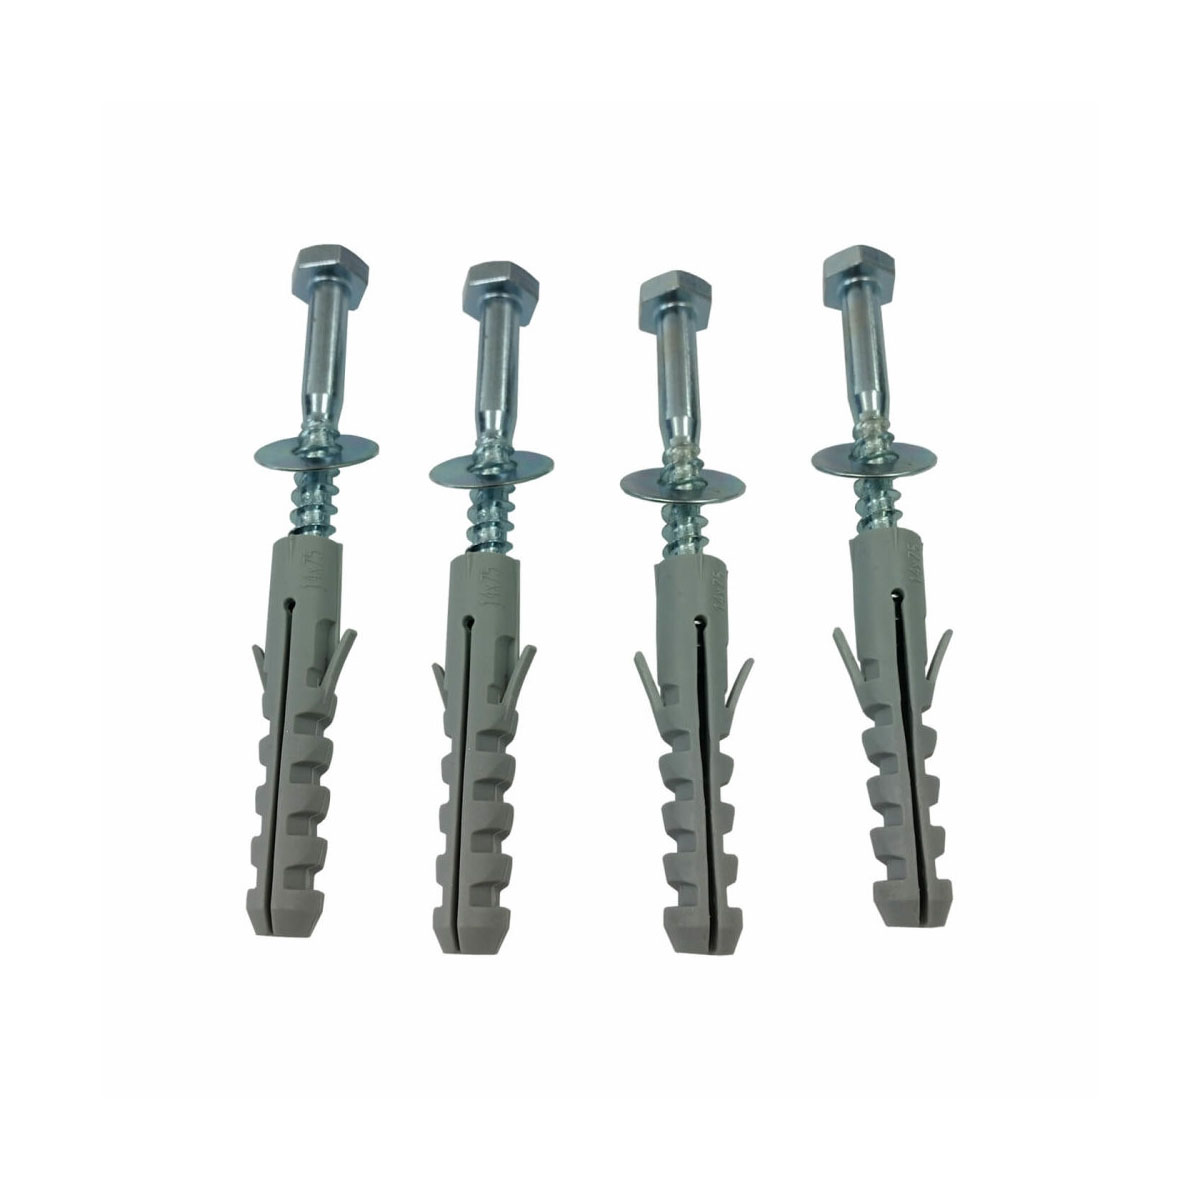 Speed Hump Fixings Kit 4x Expansion Screw Bolts